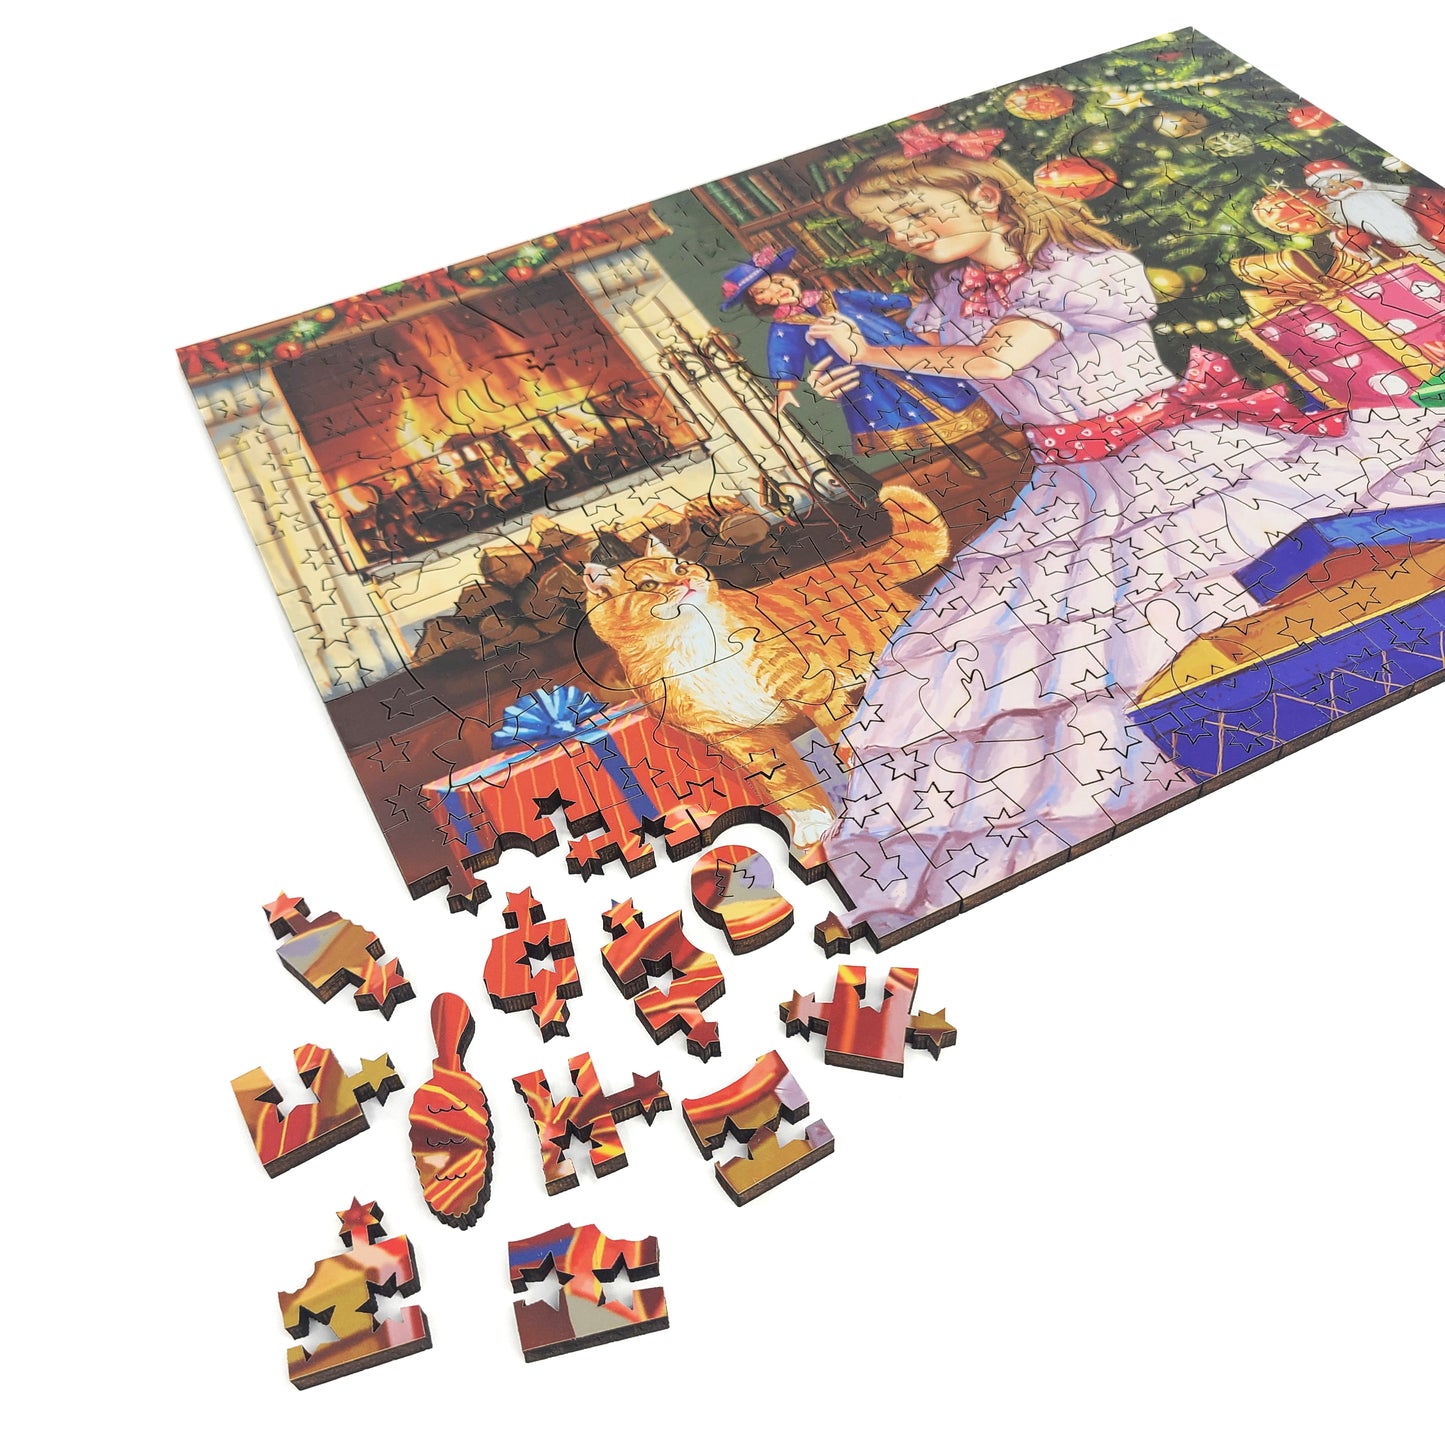 Large Format Wooden Jigsaw Puzzle with Uniquely Shaped Pieces for Seniors and Adults - 235 Pieces - Christmas Gift